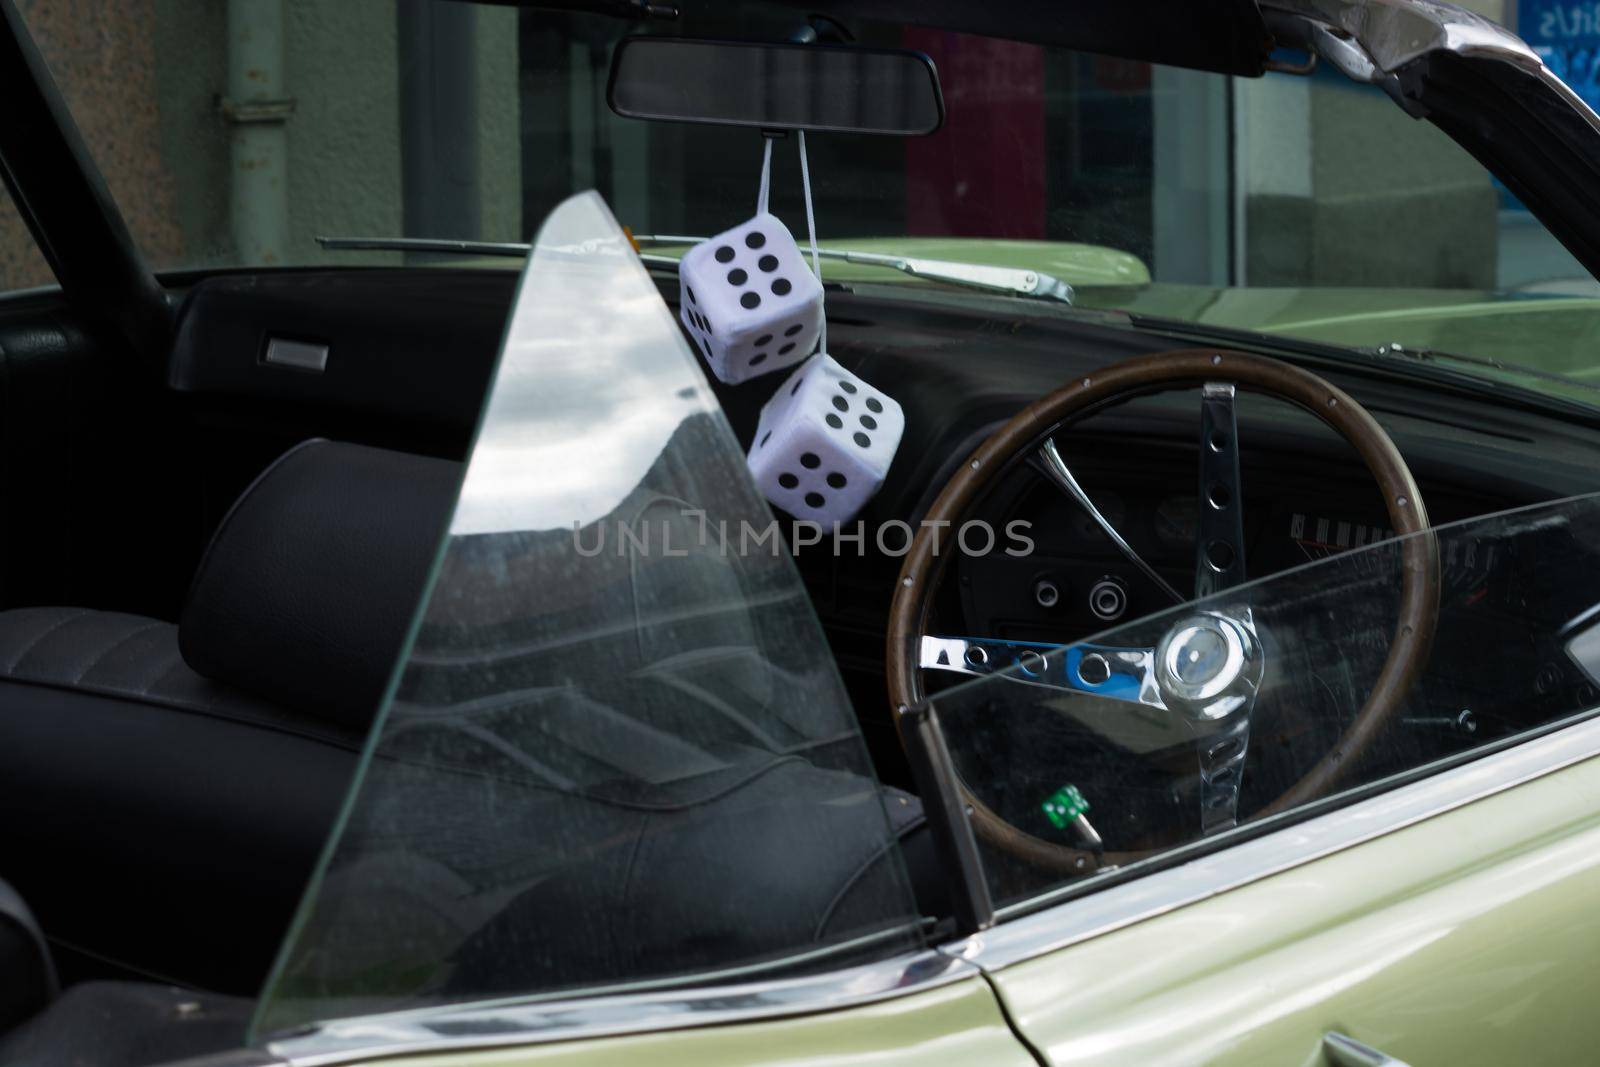 Fuzzy Dice on the rearview mirror         by JFsPic